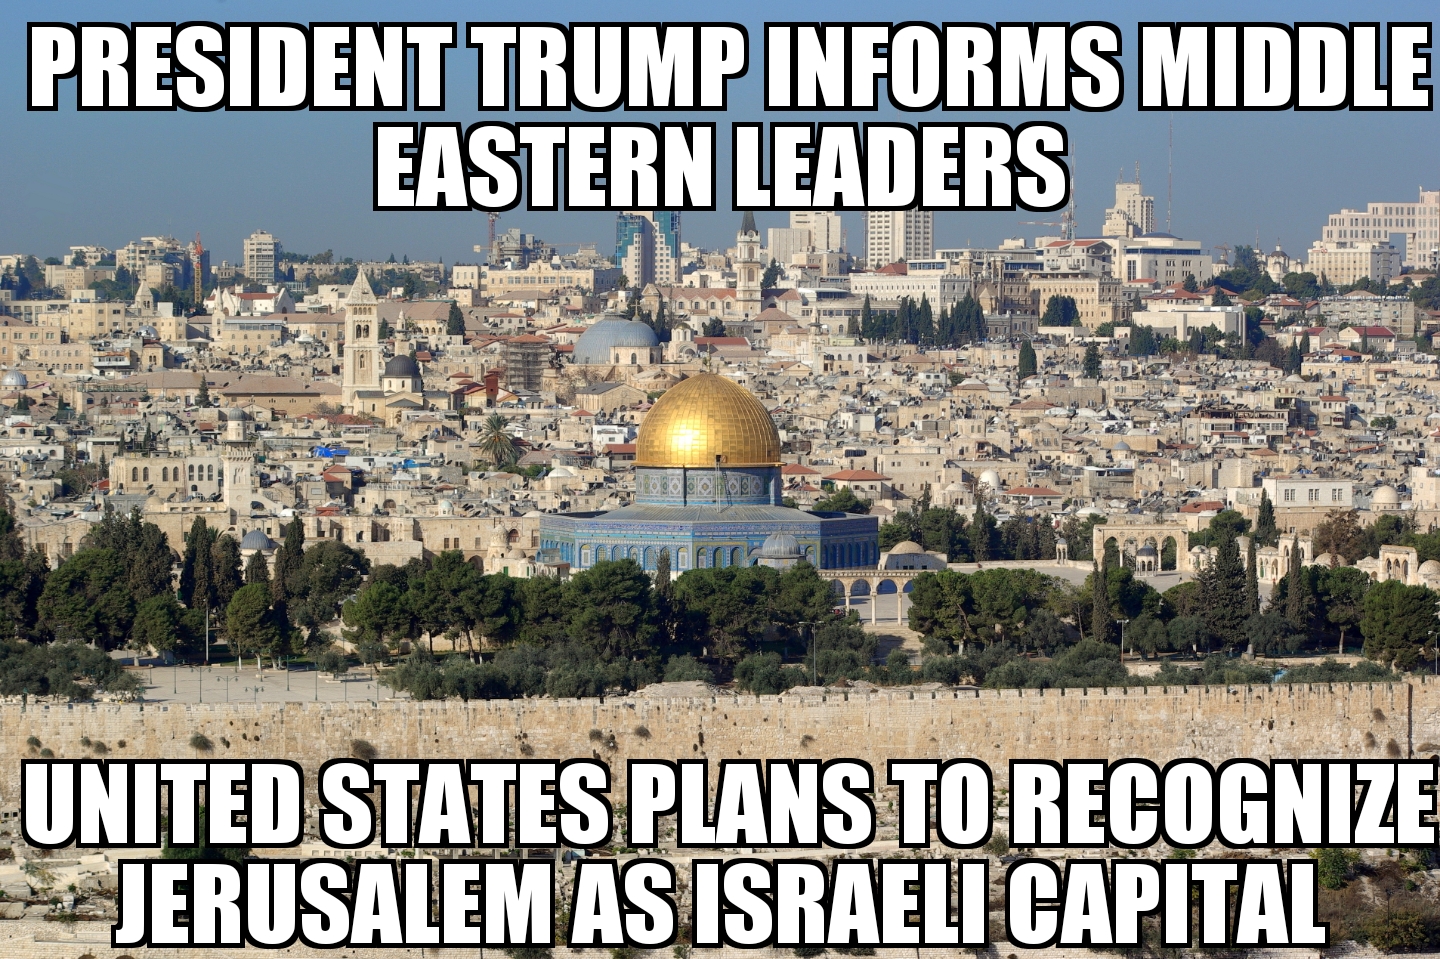 U.S. plans to recognize Jerusalem as capital of Israel